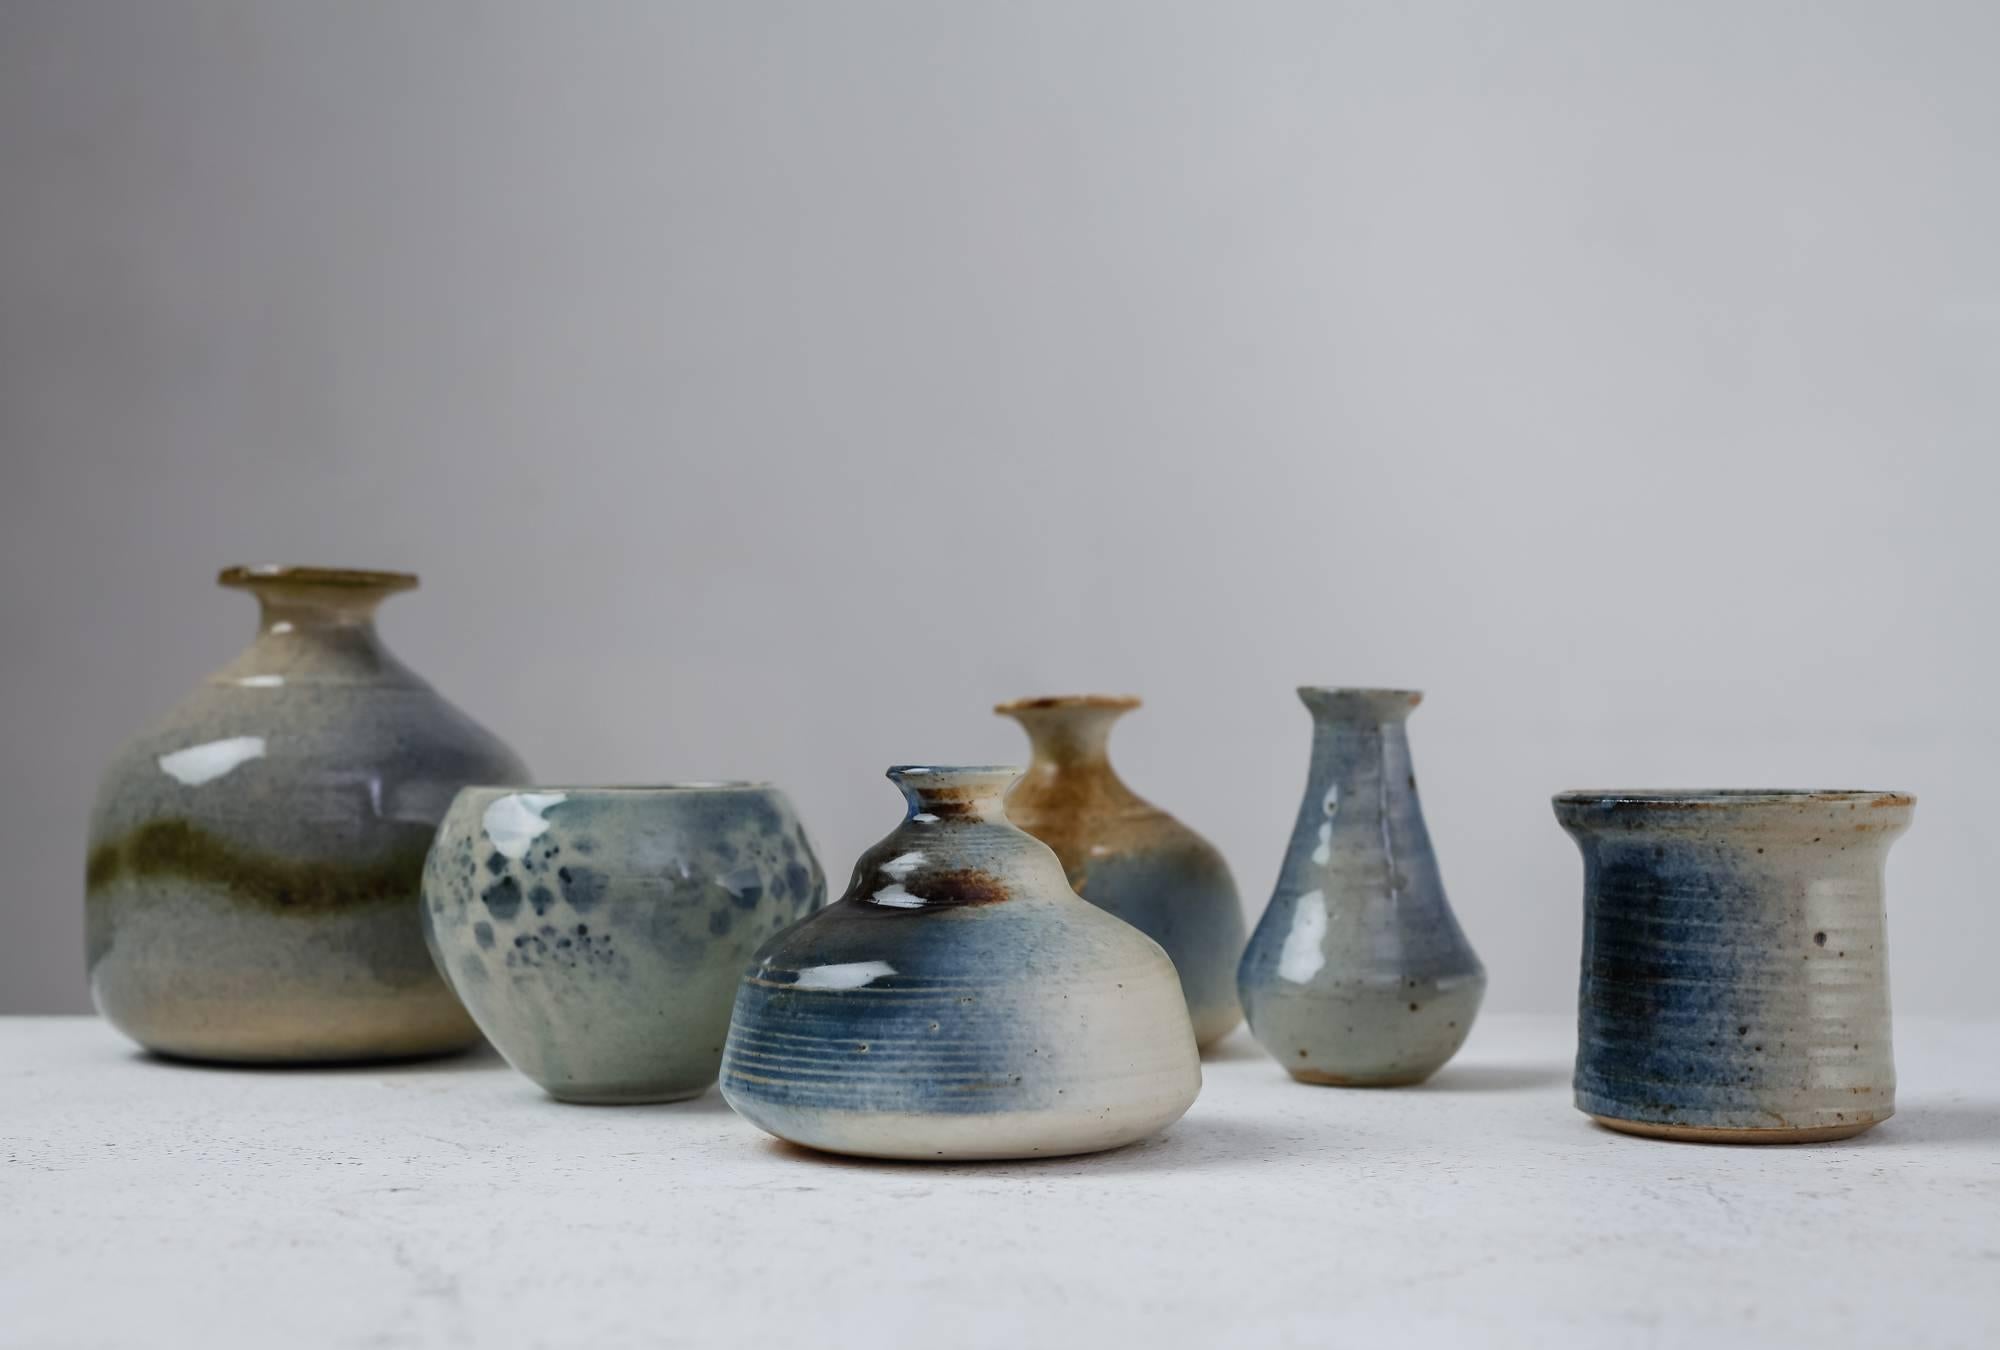 A set of six vases with a mostly blue and grey glaze finish, by French ceramist Franco Agnese. 
The lowest piece is 7 cm (2.7